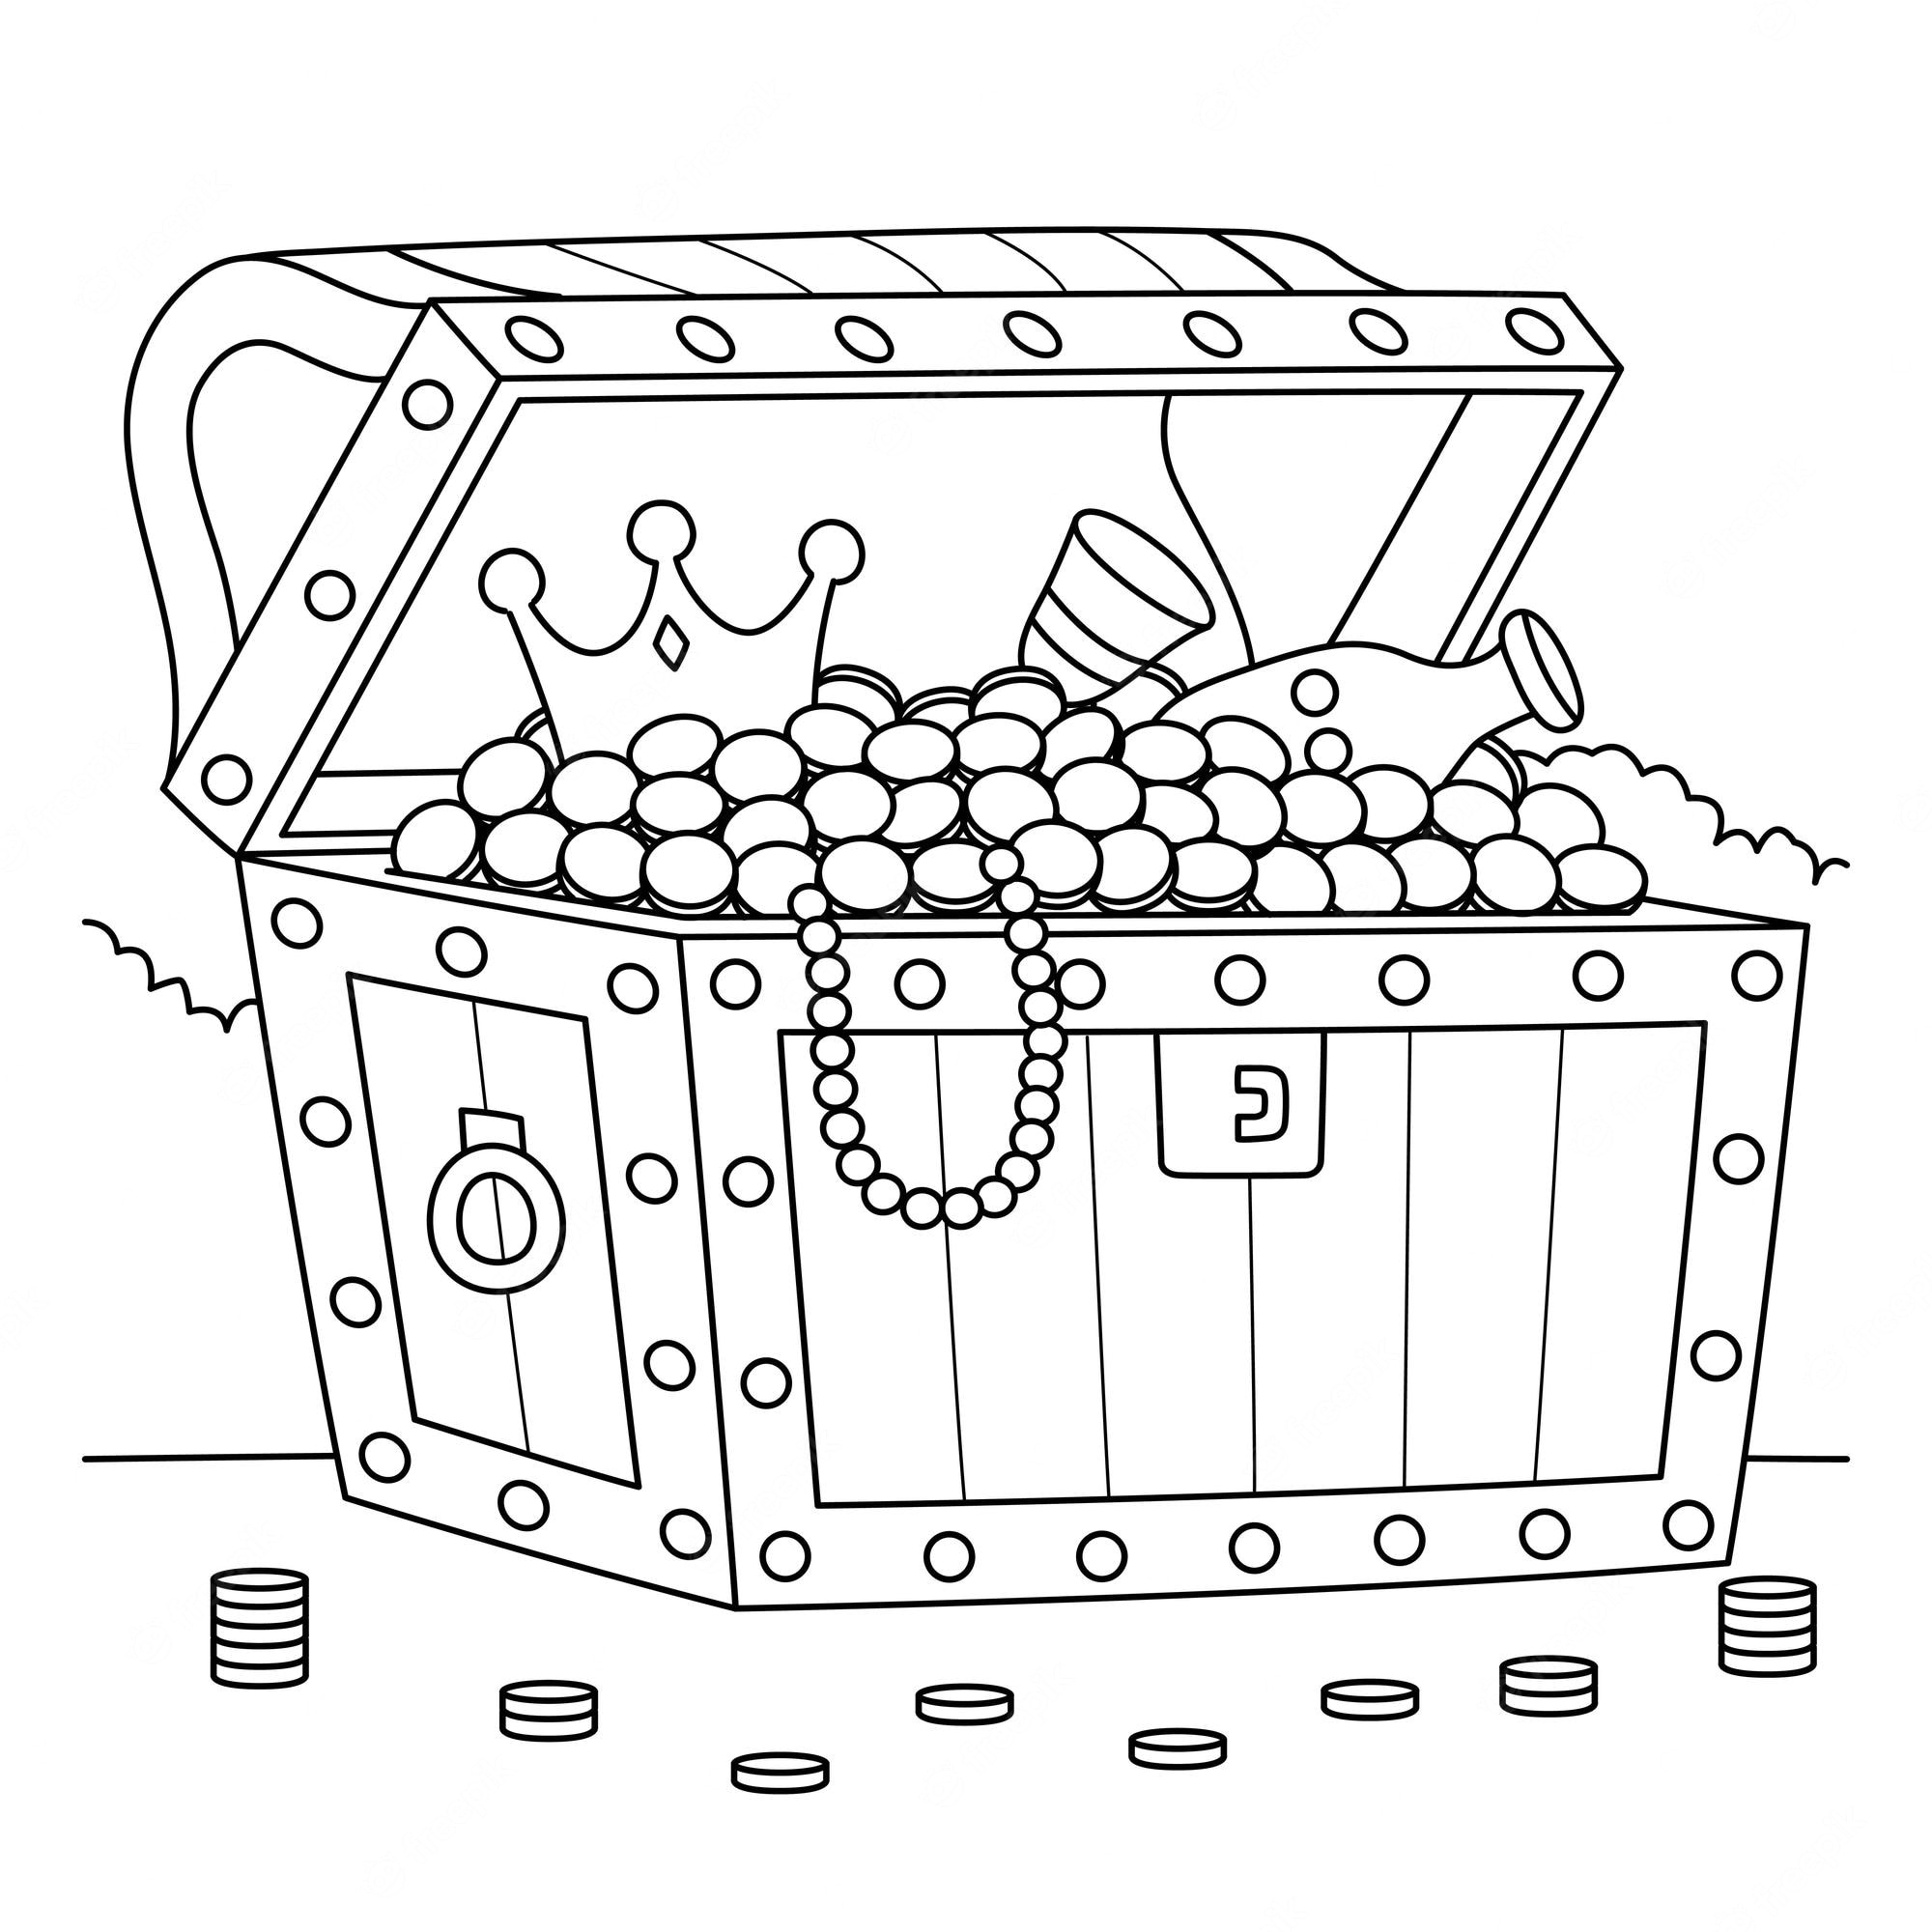 Premium Vector | Big treasure chest coloring page for kids